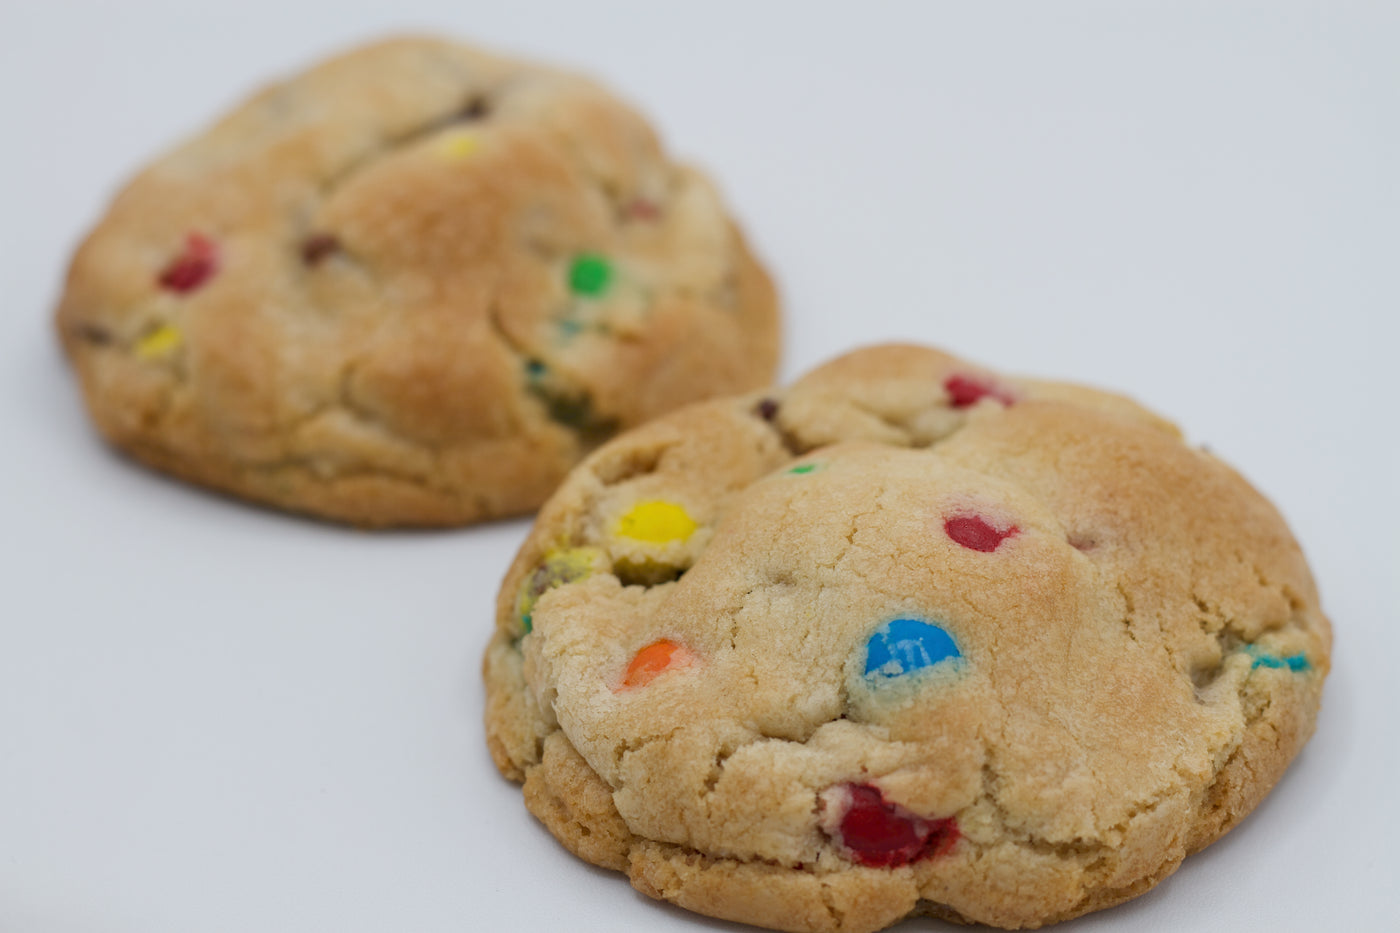 Chocolate chip M&M cookies from Bake The Cookie Shoppe and Las Vegas